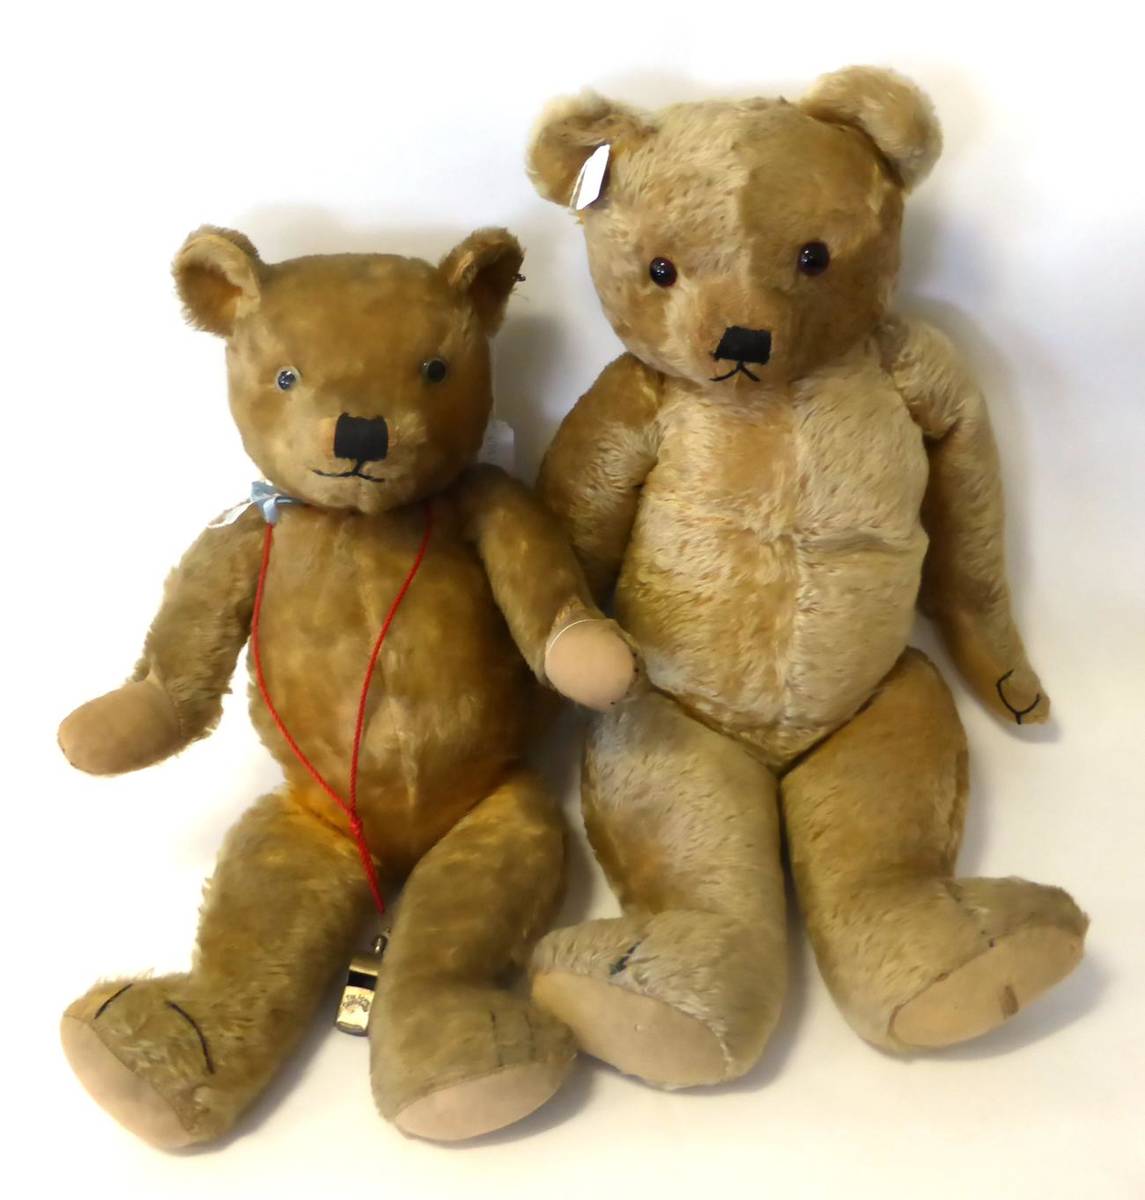 Lot 1005 - Circa 1940's Merrythought Jointed Teddy Bear in yellow plush with glass eyes, stitched nose and...